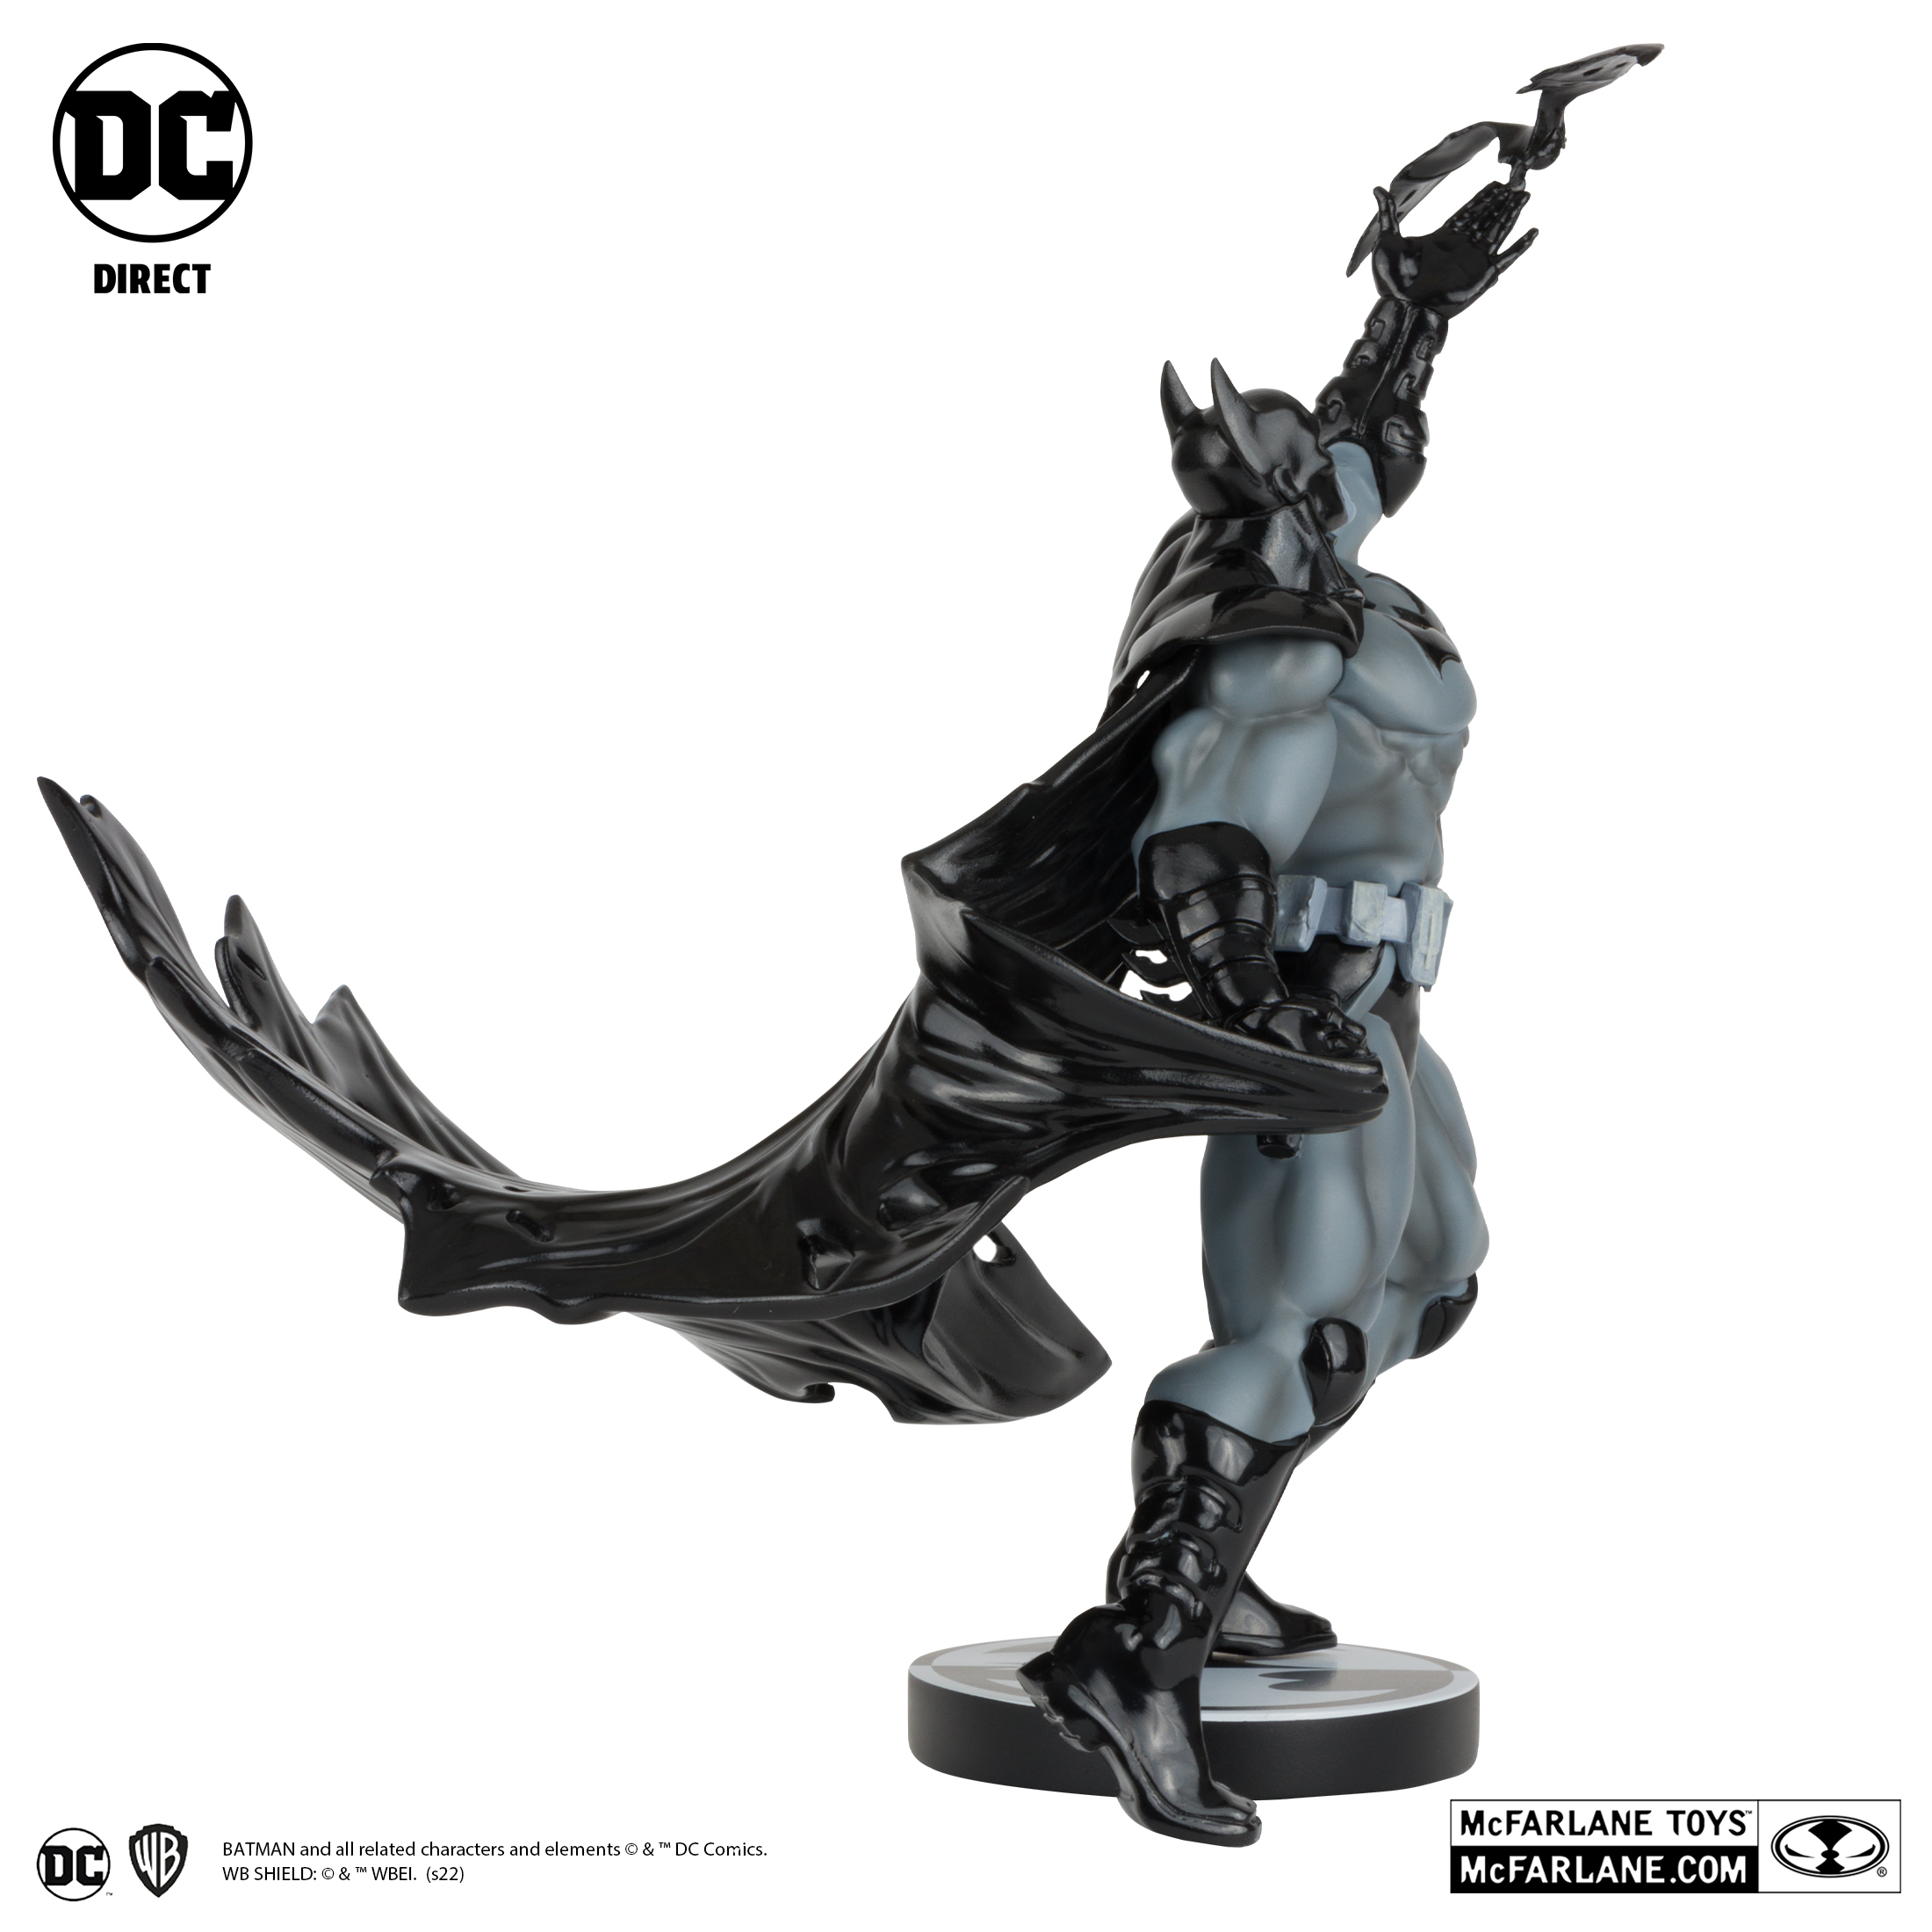 McFarlane Toys Release Two New Black And White Batman Statues - Dark Knight  News